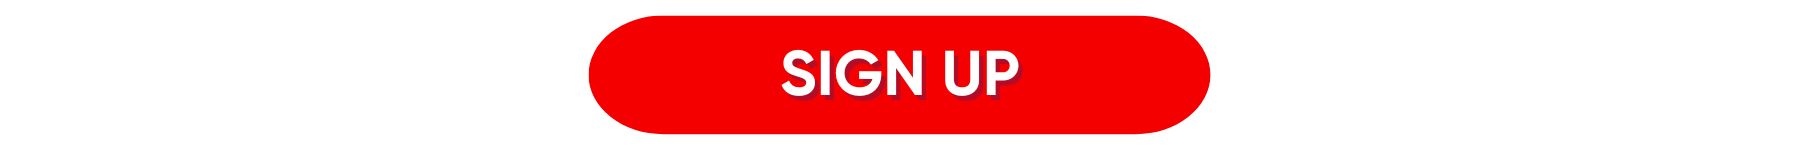 Volunteer Sign Up Button